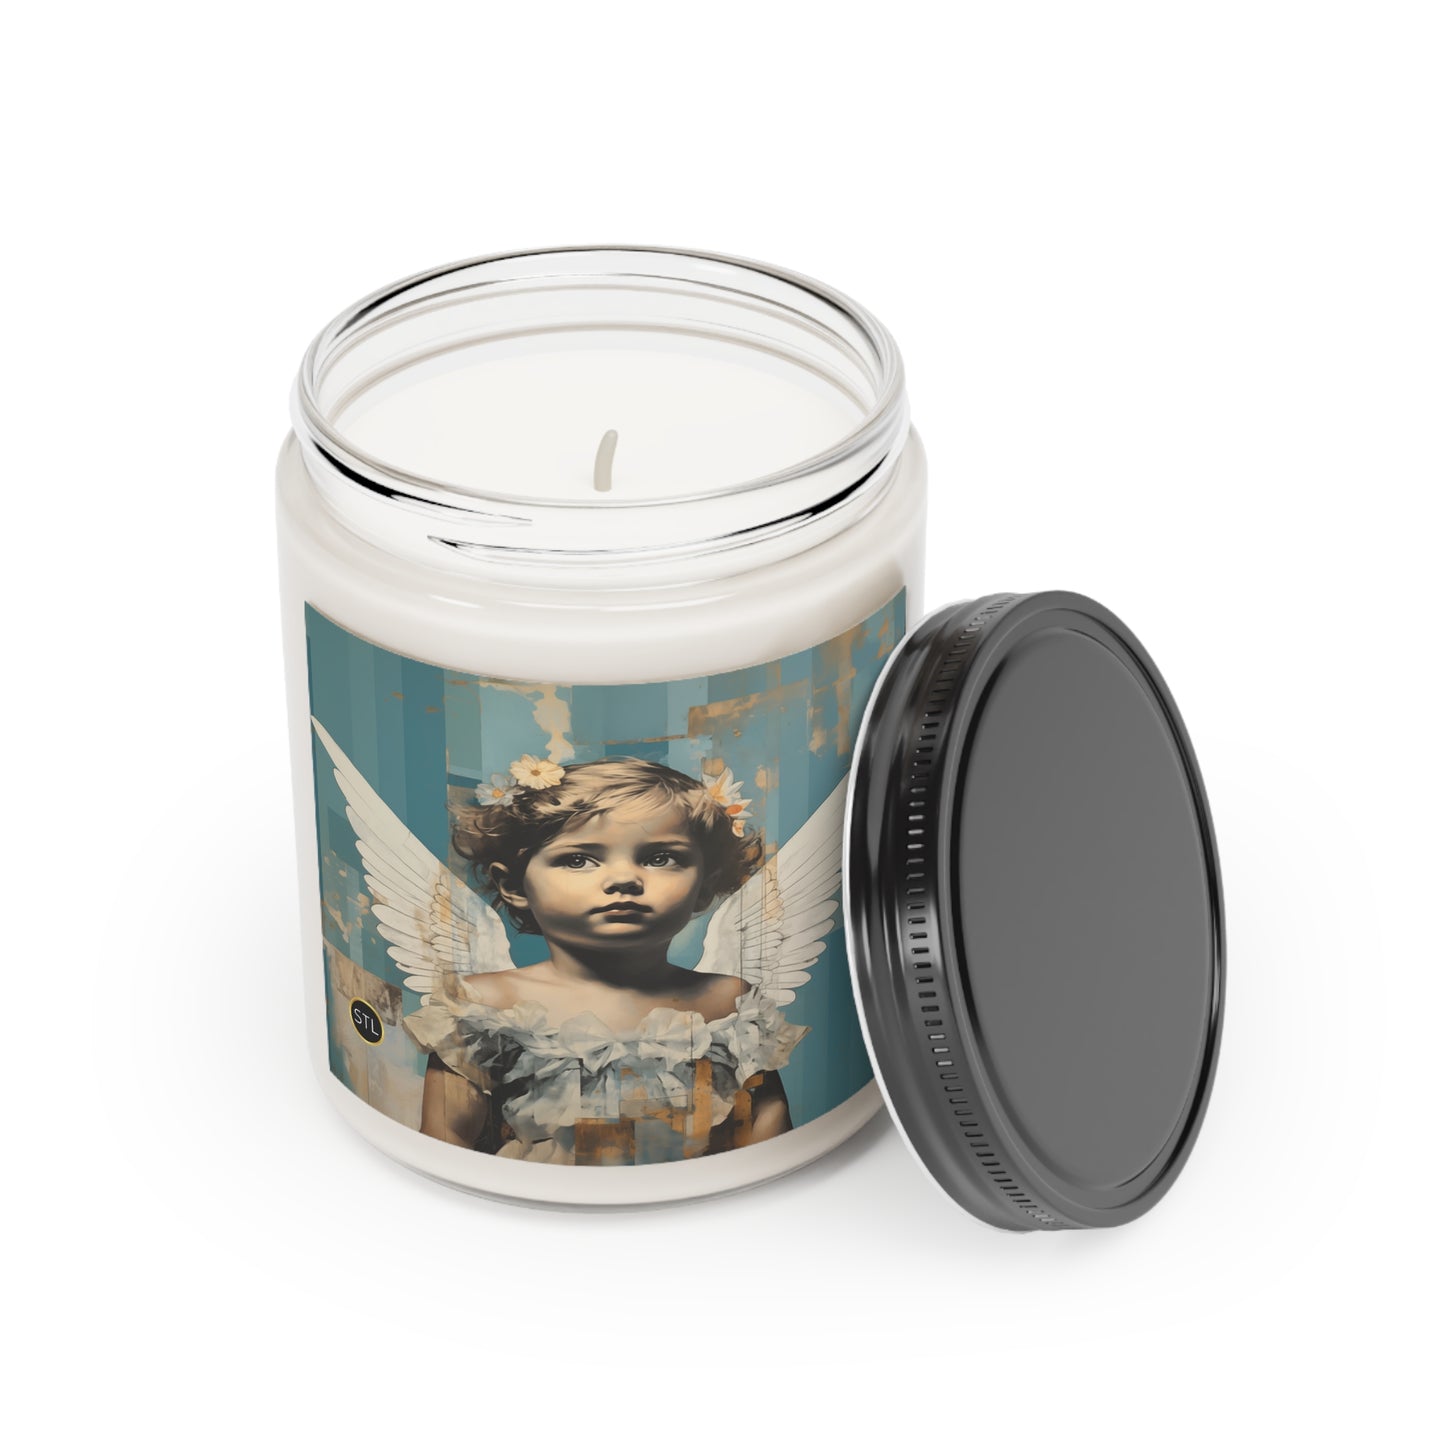 Little Angel Girl Hand-Poured Vegan Soy Scented Candle - Cinnamon, 9oz